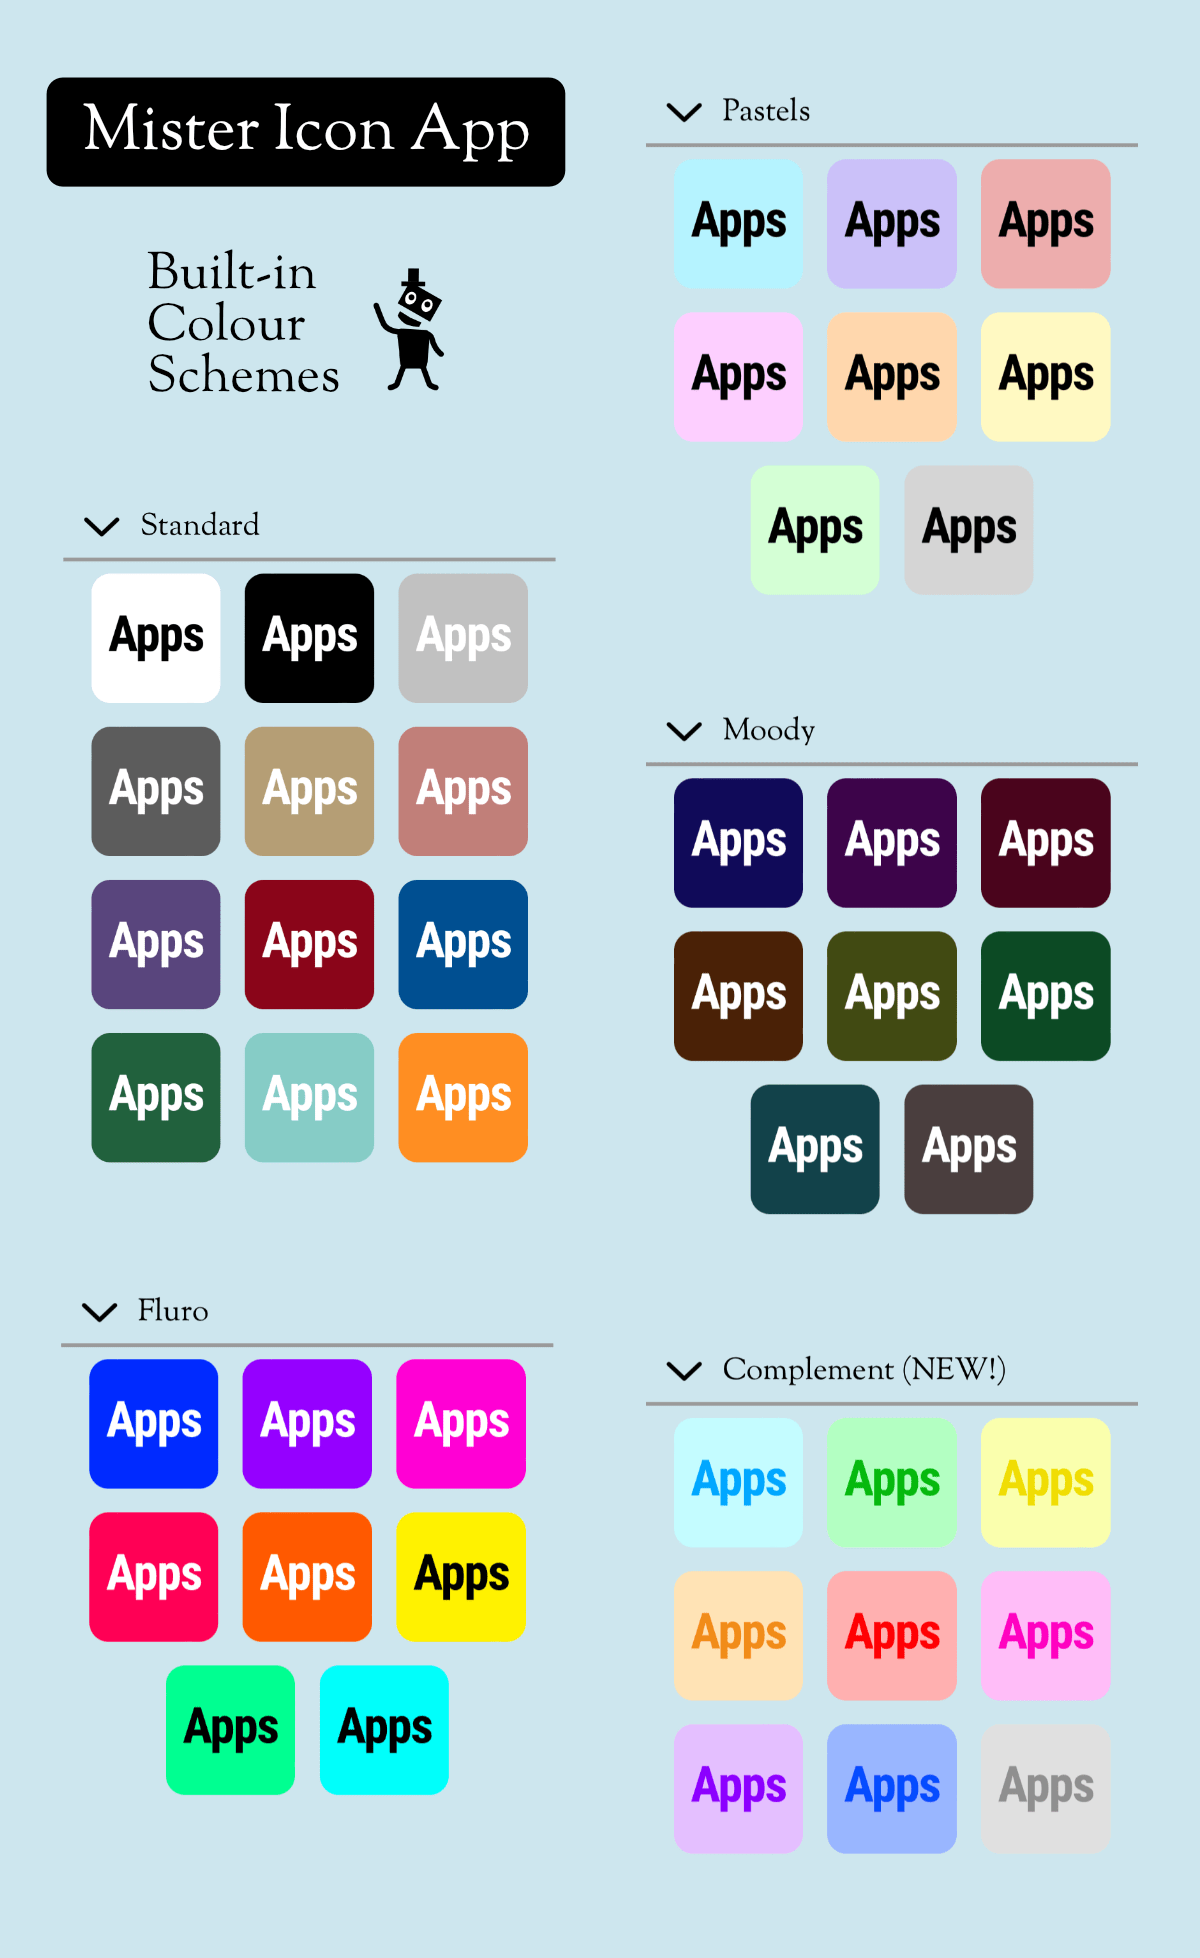 Colour scheme variations in the Mister Icon app